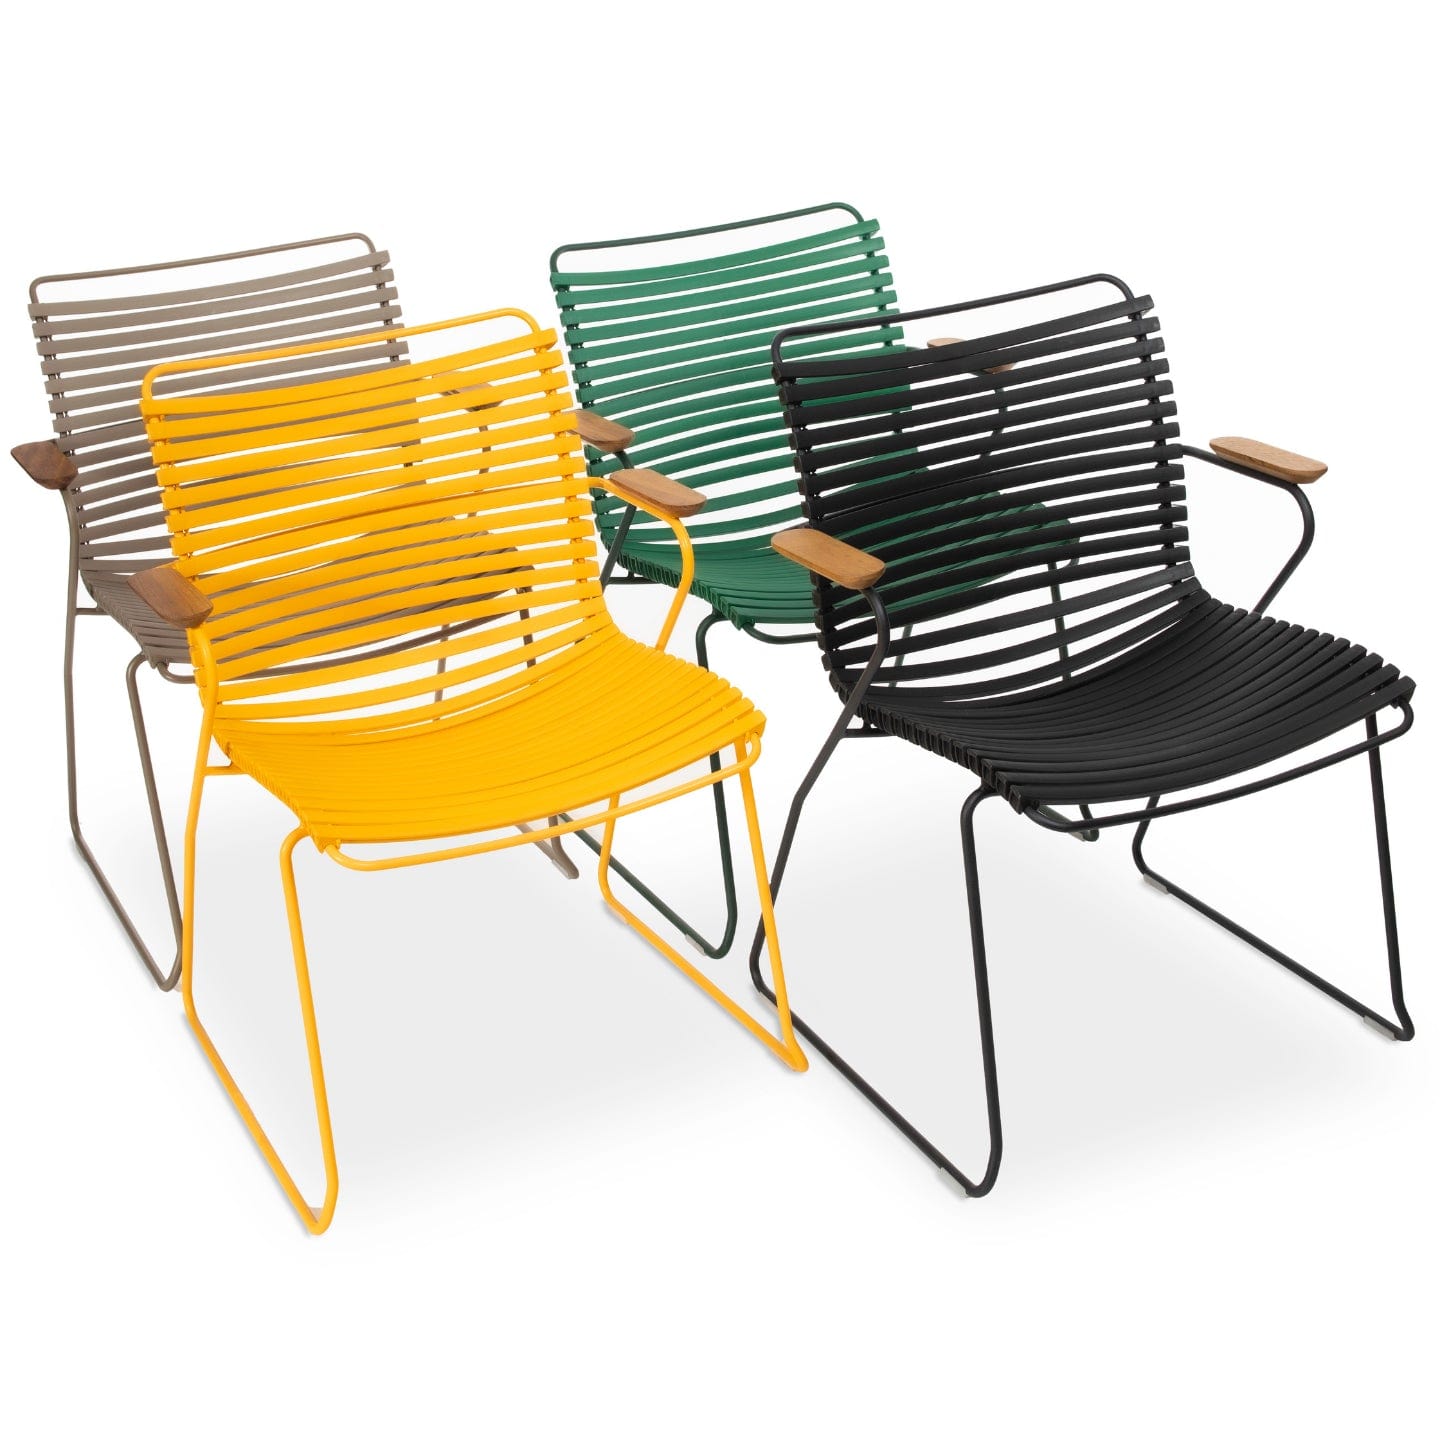 sohoConcept Outdoor Chairs Bodrum Patio Dining Armchair | Metal Base Plastic Seat Outdoor Chair